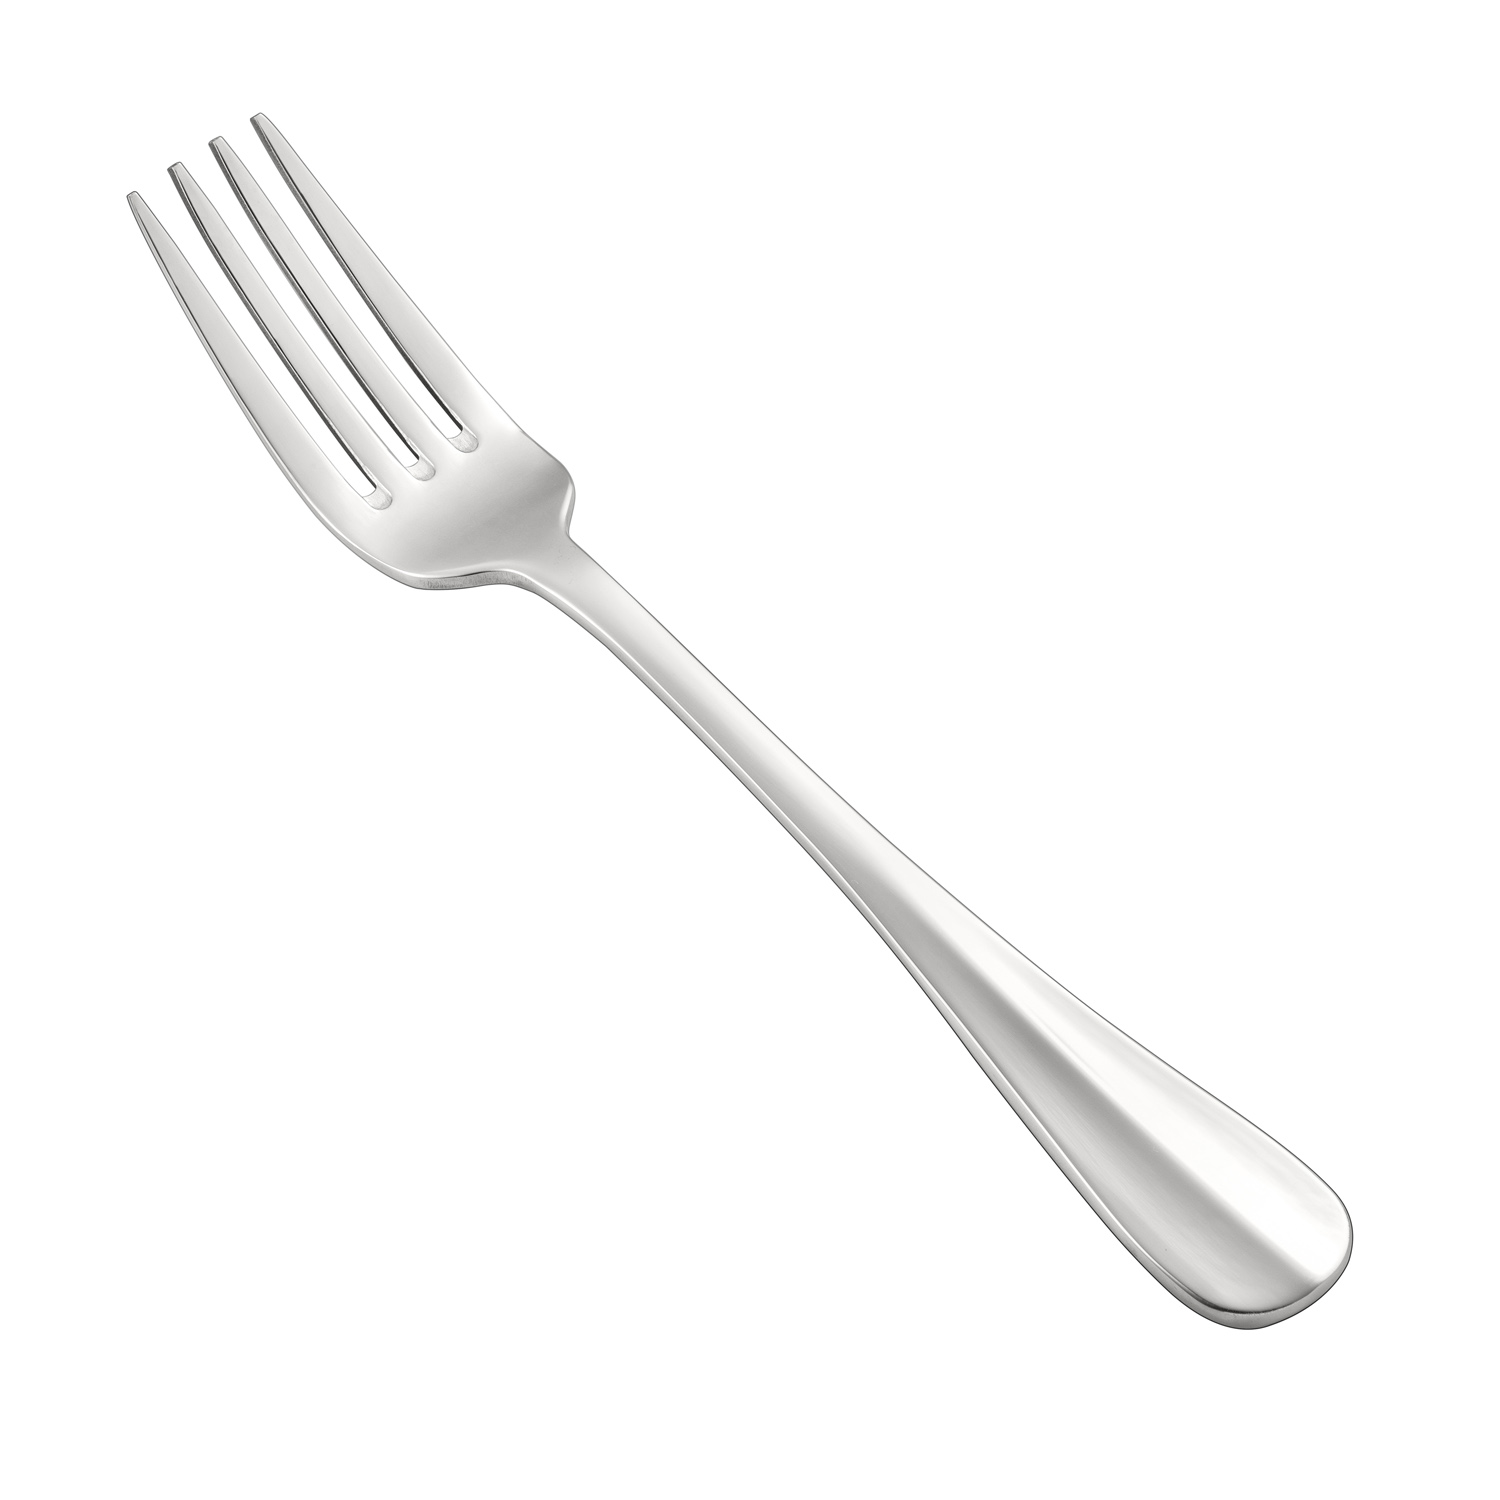 CAC China 8005-11 Exquisite Table Fork, Extra Heavyweight 18/8, 8 1/4"